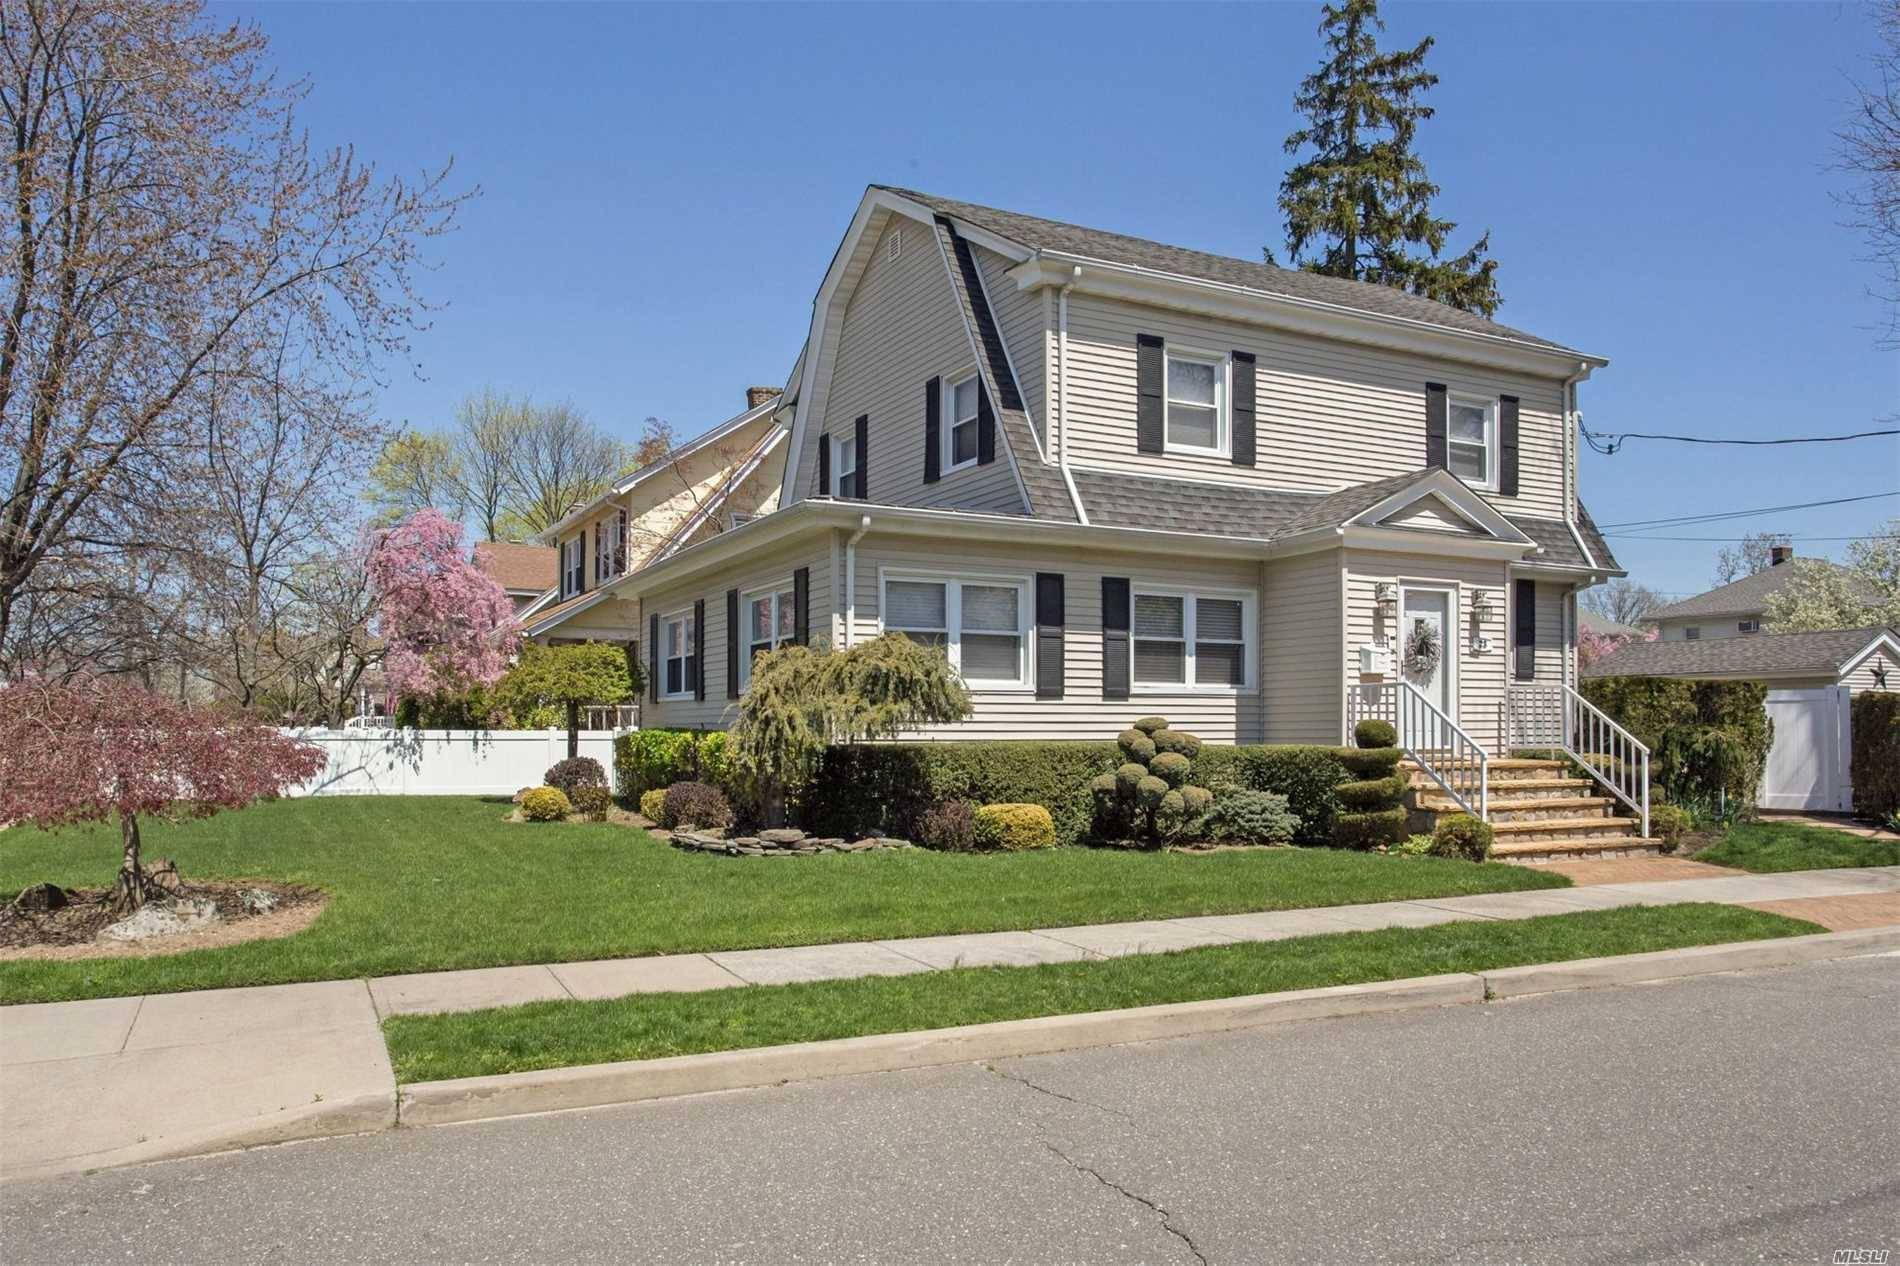 Completely Remodeled 1920'S Dutch Colonial -No Detail Overlooked In This Custom Designed Home.